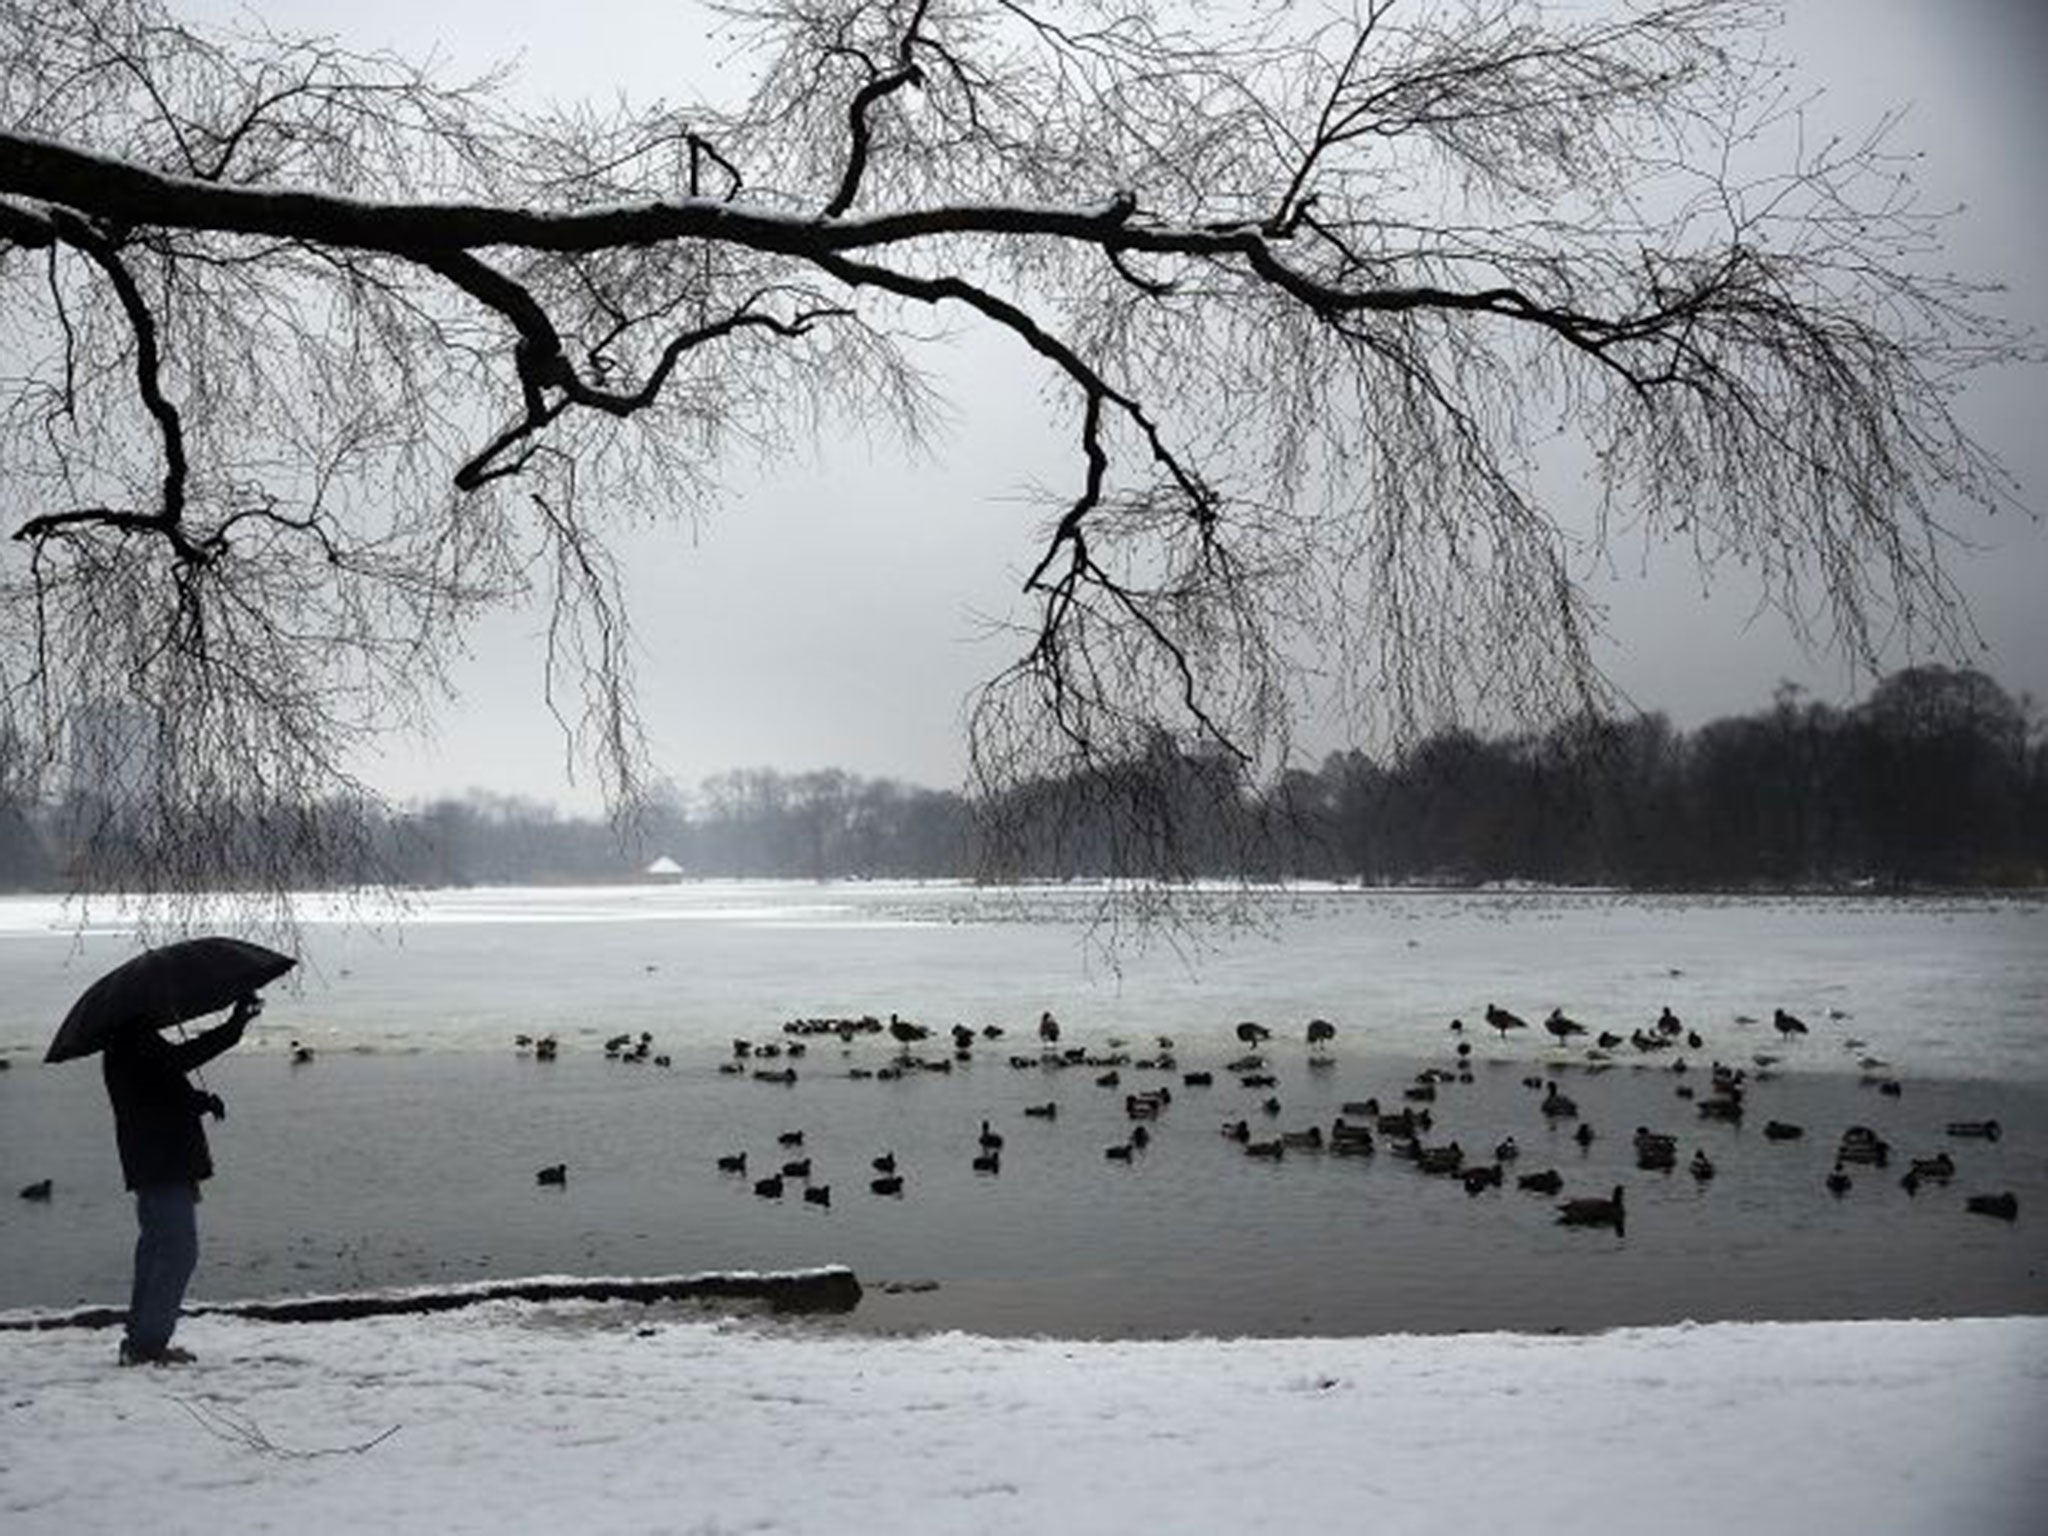 A man takes a picture of ducks and geese at a lake in Brooklyn's Prospect Park on 24 January